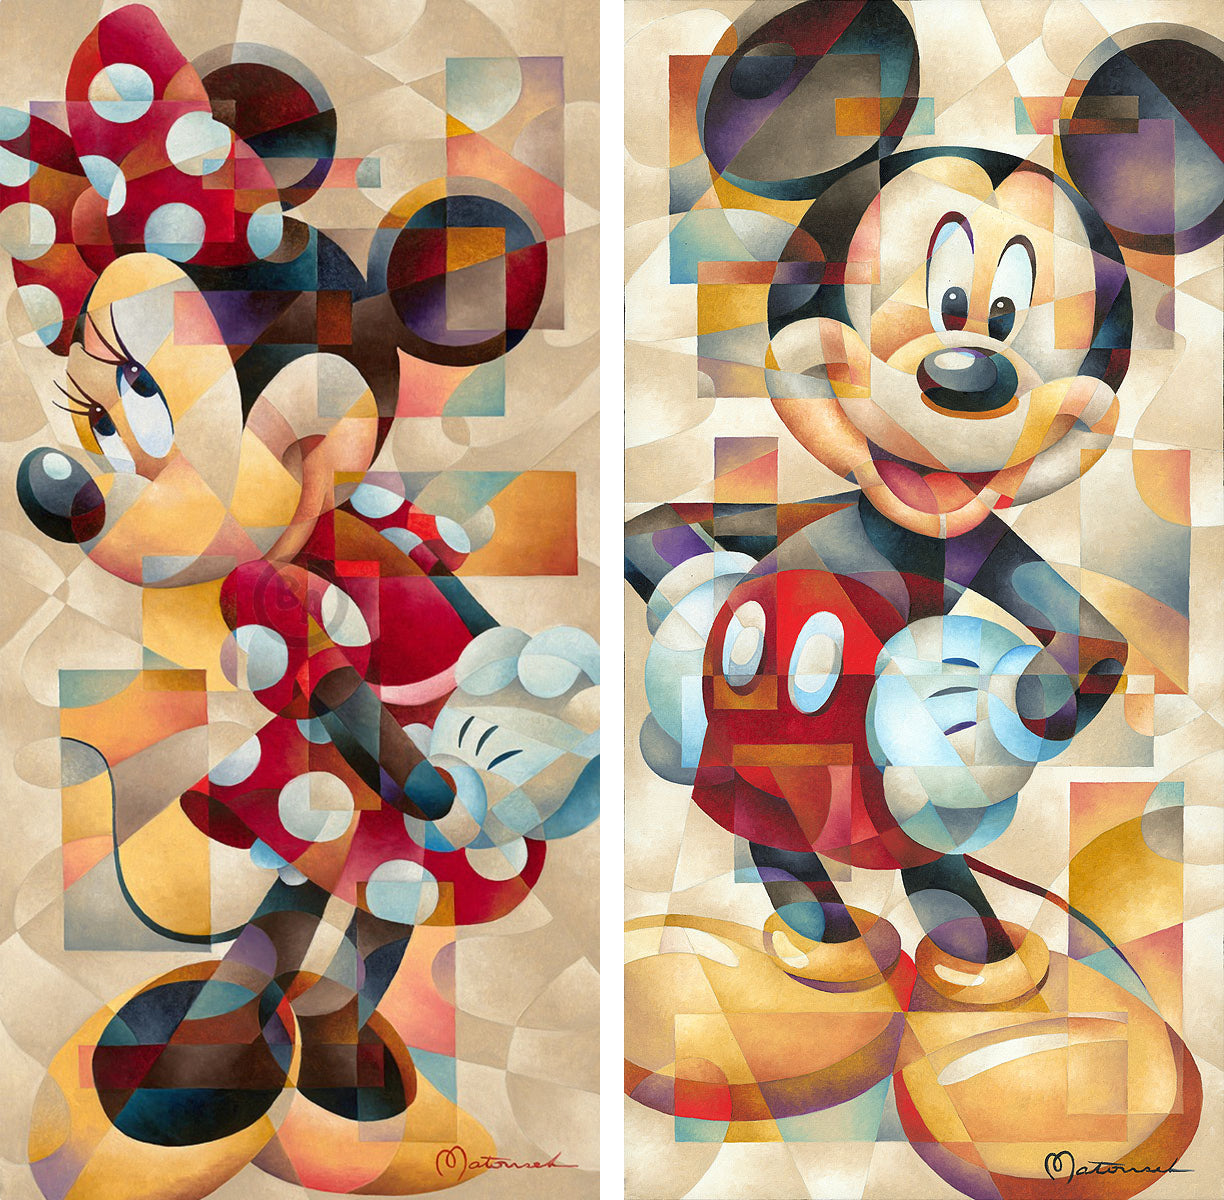 mickey mouse and minnie mouse sketches